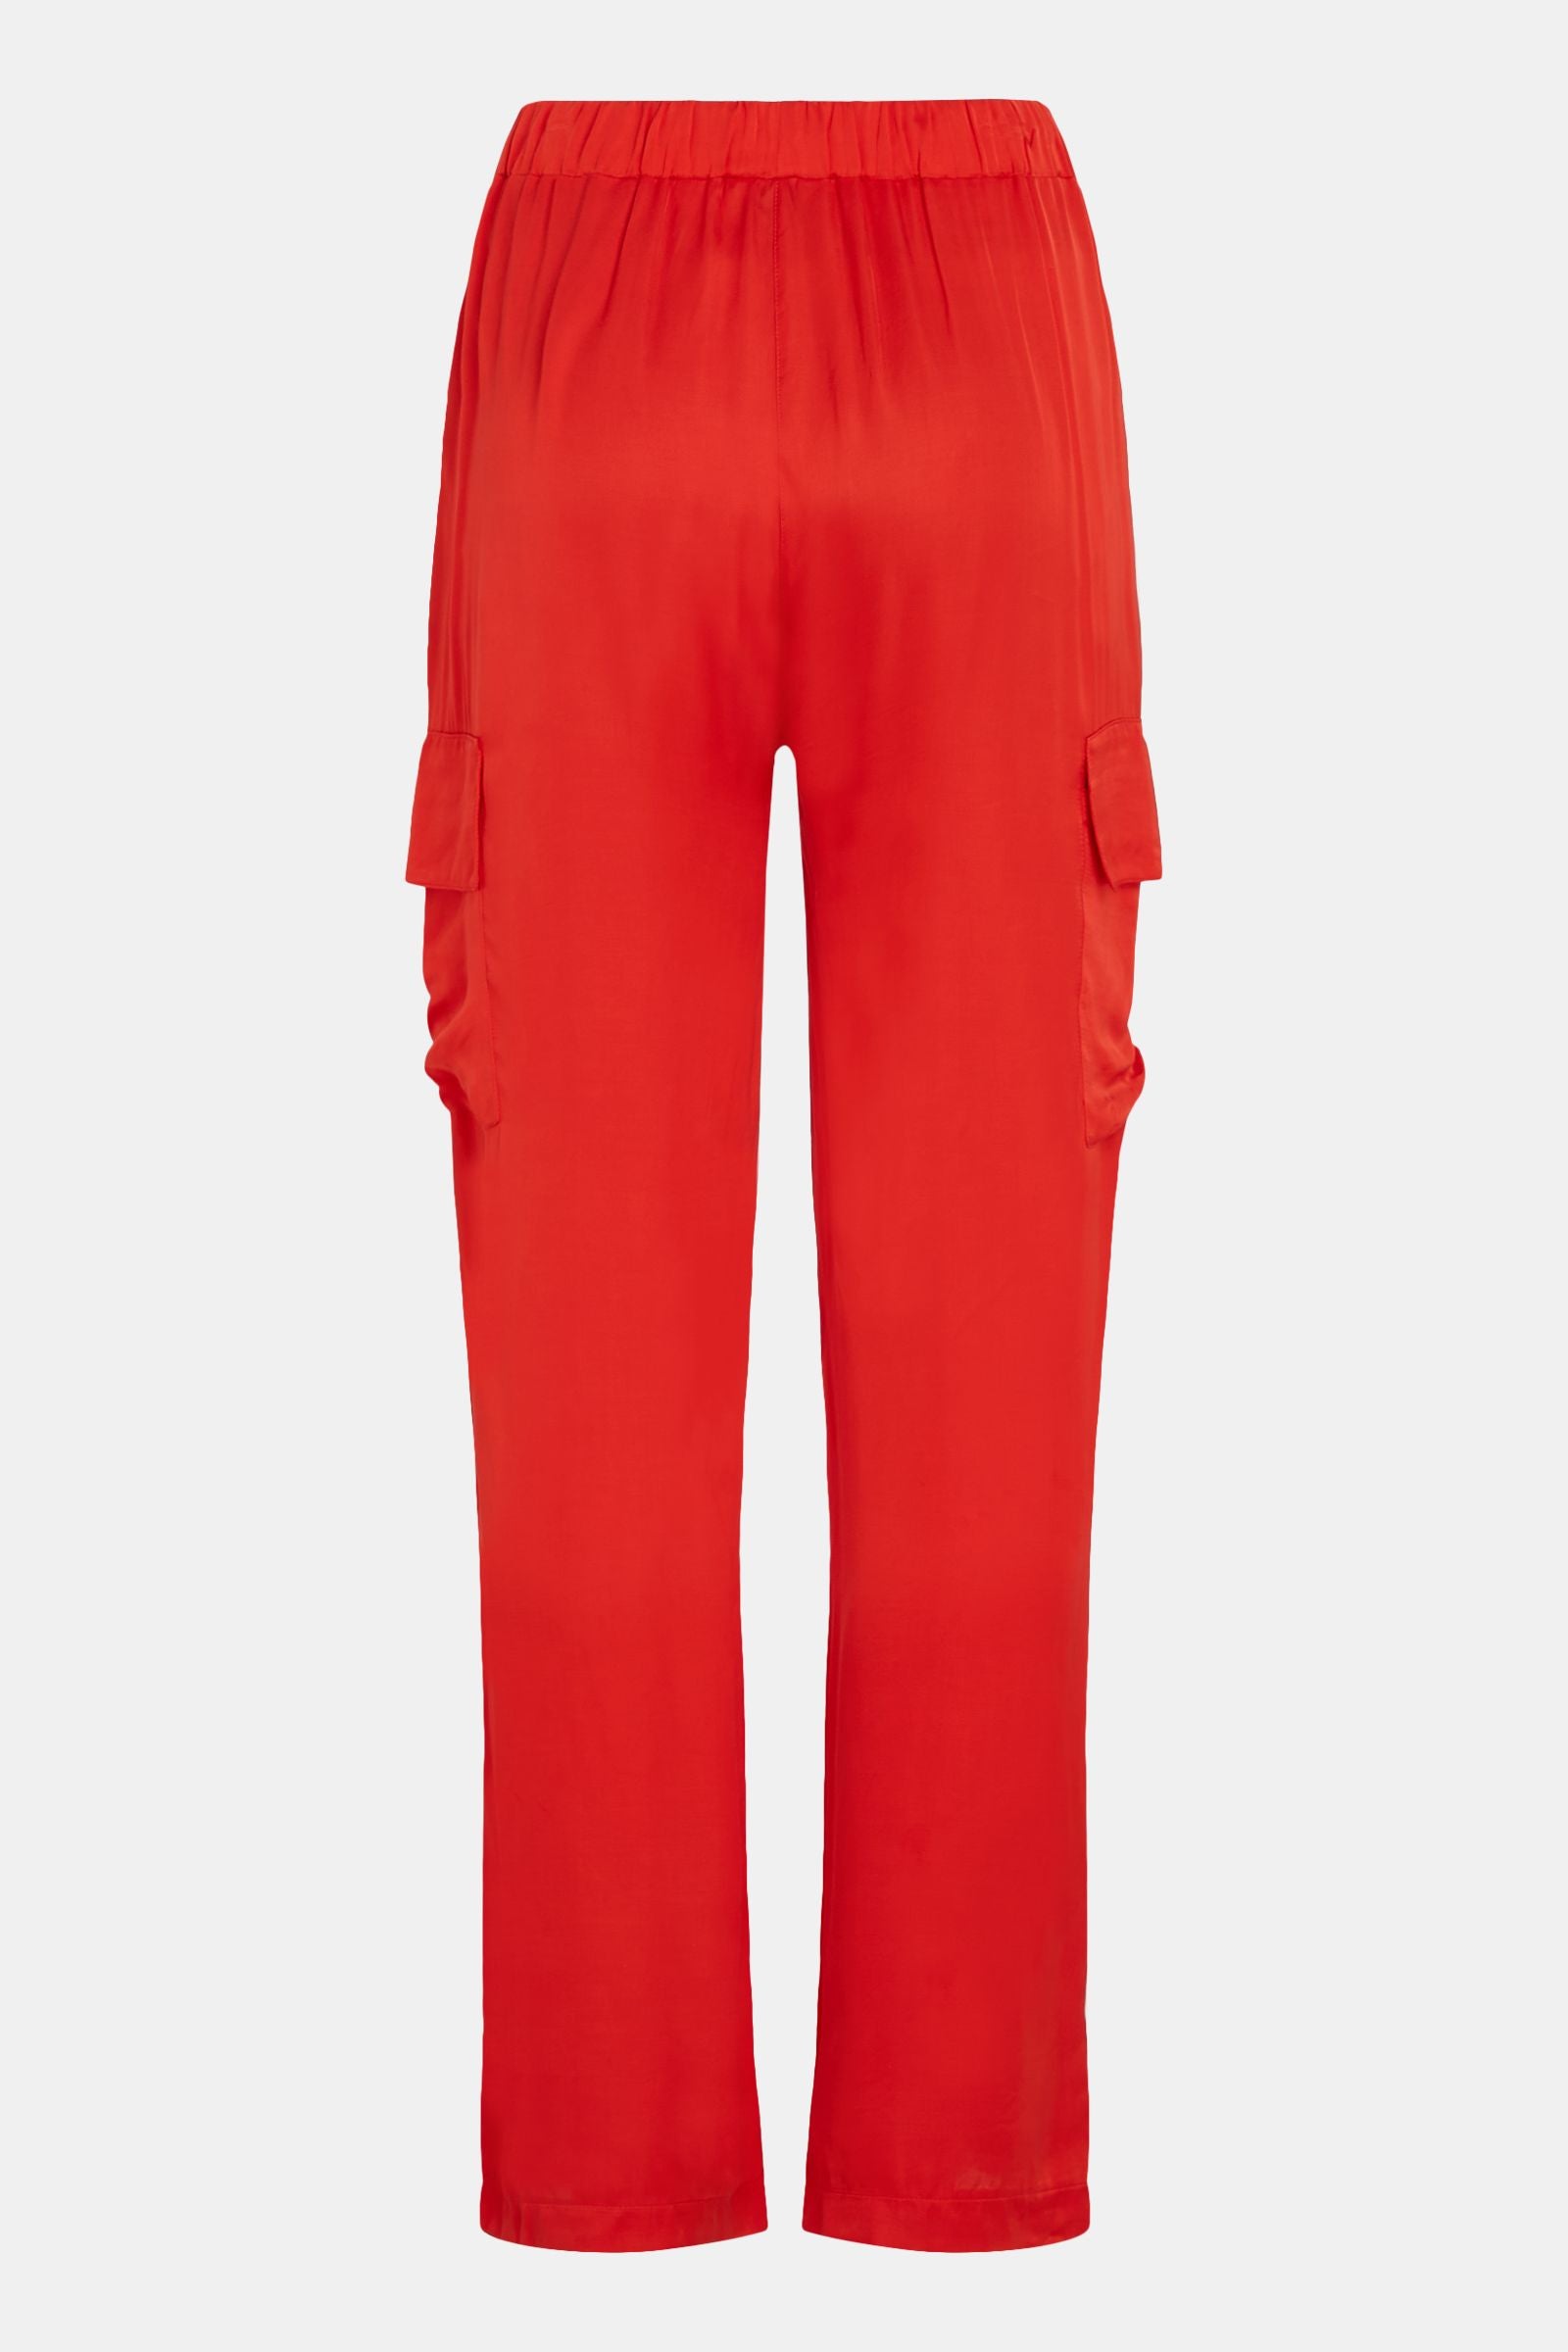 TROUSERS (S24F1415) CORAL